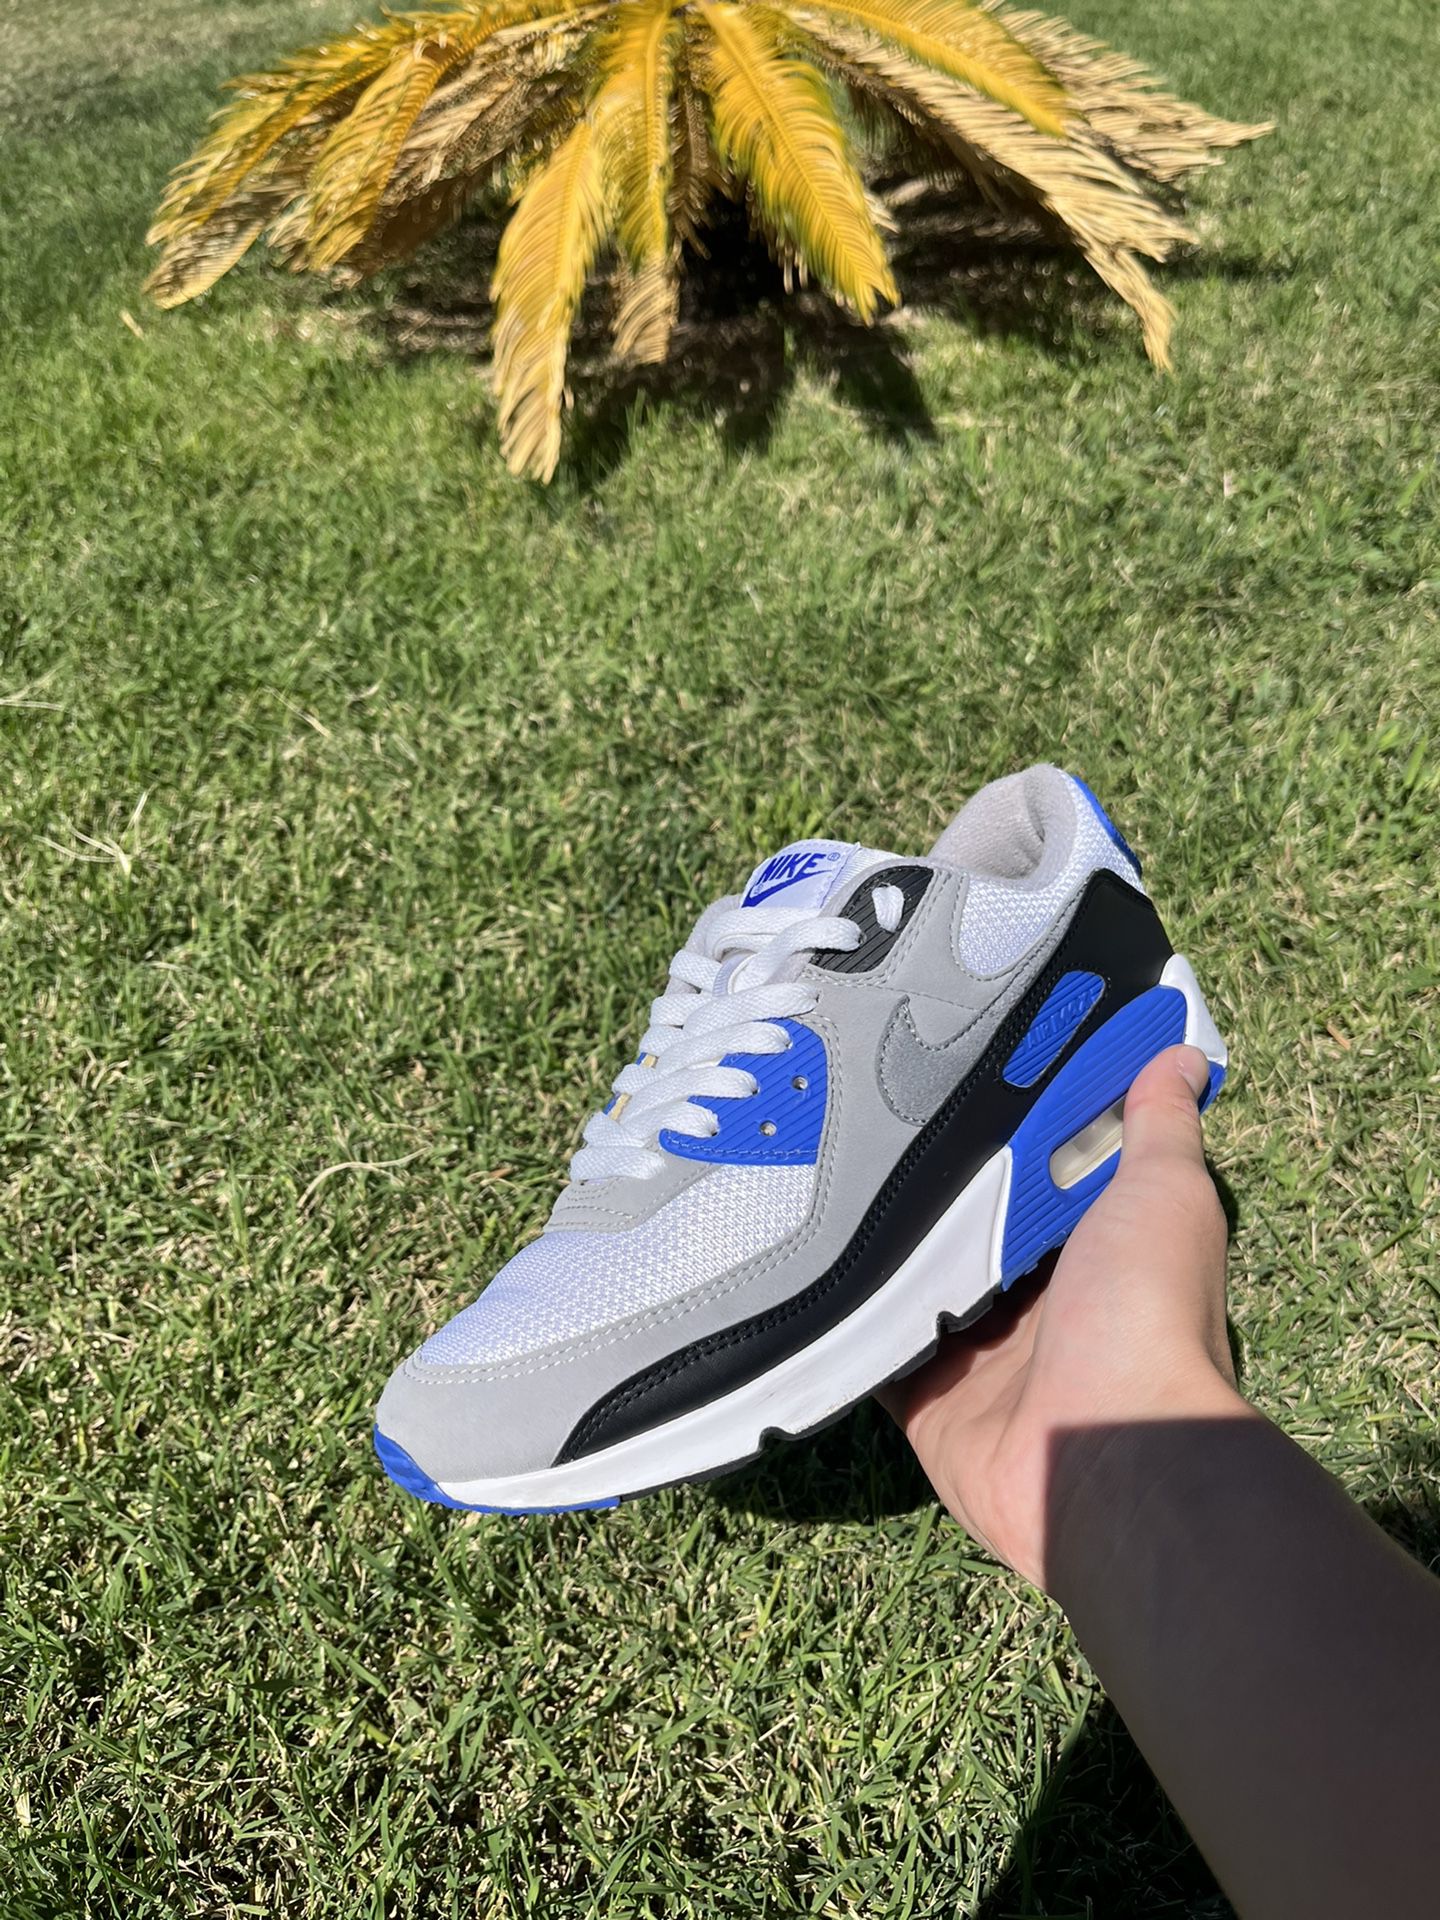 Nike Air Max /recraft royal for Sale in Fowler, -